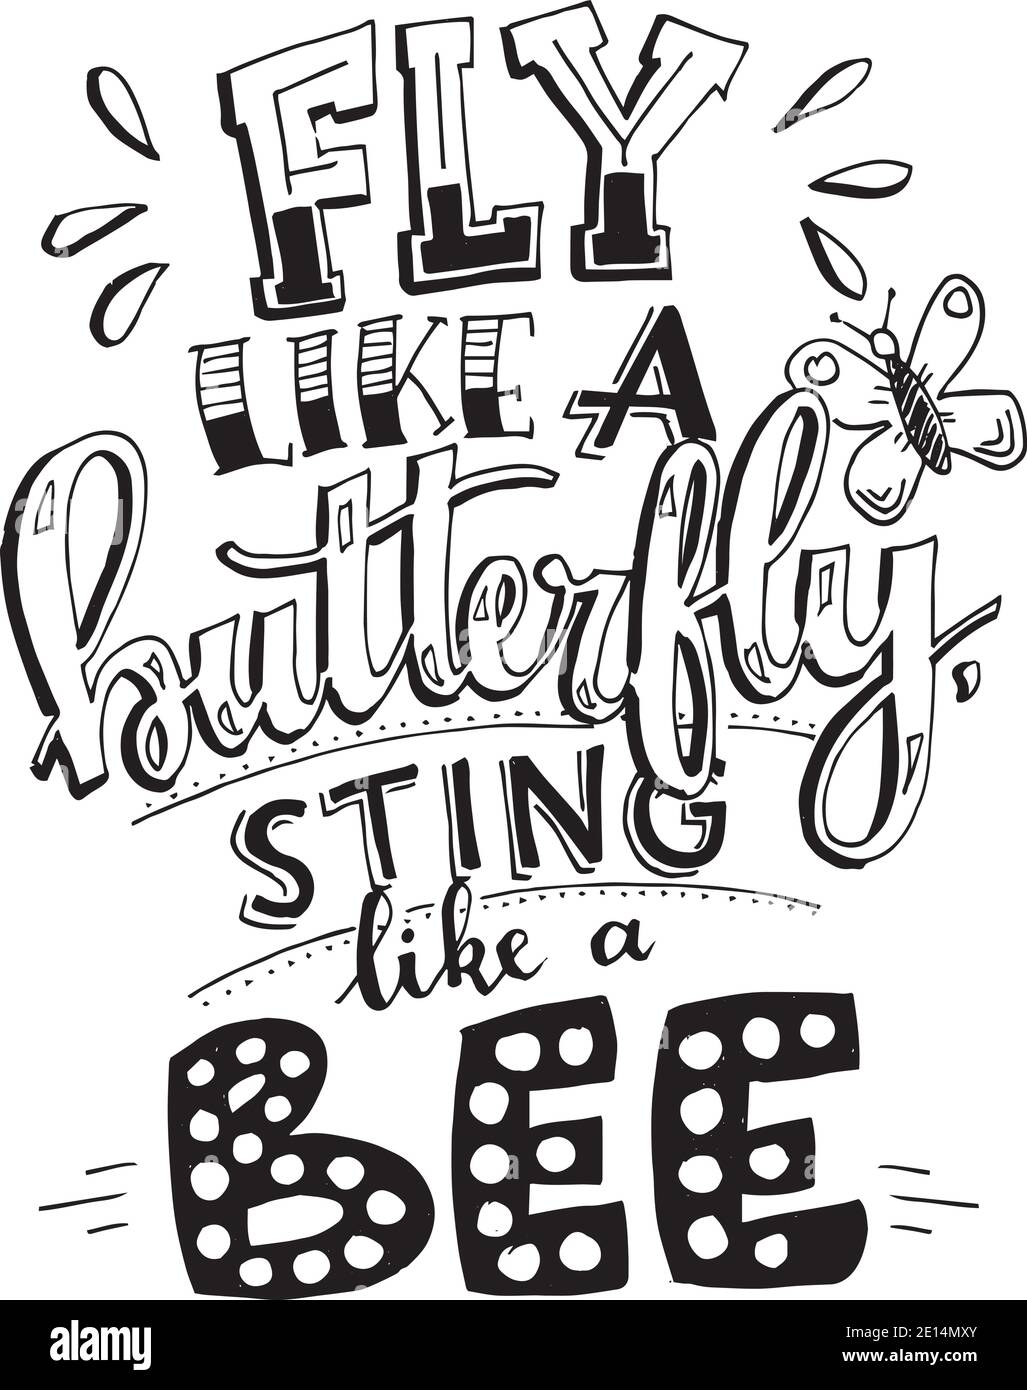 Fly Like A Butterfly Sting Like A Bee Logo Sign Inspirational Quotes And Motivational Typography Art Lettering Composition Design Stock Vector Image Art Alamy